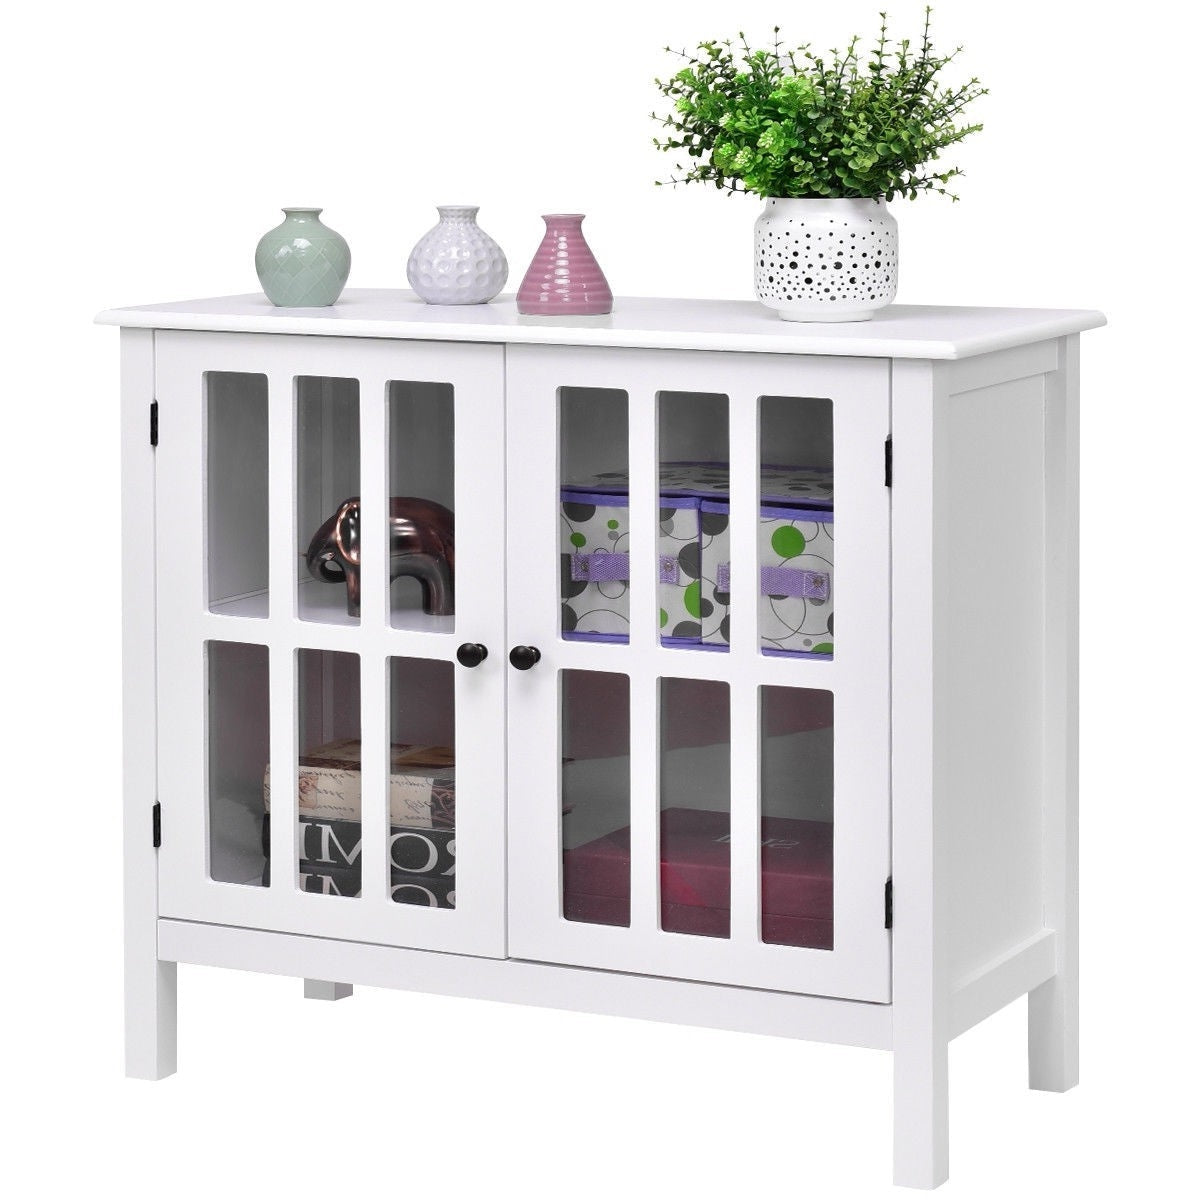 Dining > Sideboards & Buffets - White Wood Sideboard Buffet Cabinet With Glass Panel Doors